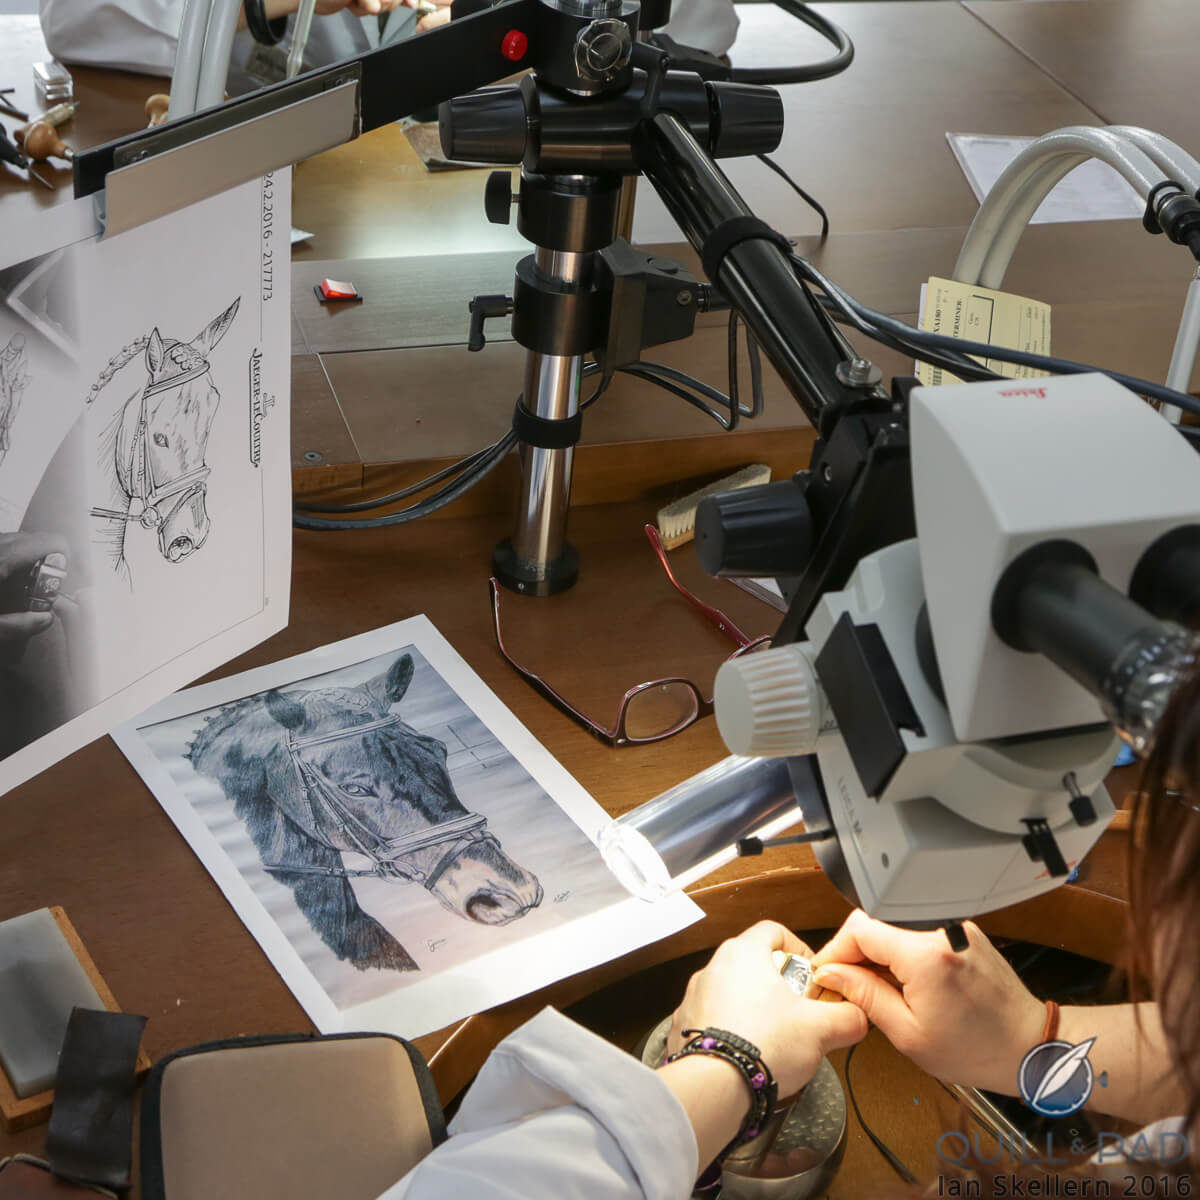 JLC engraver Marsura working on the portrait of Gucci 